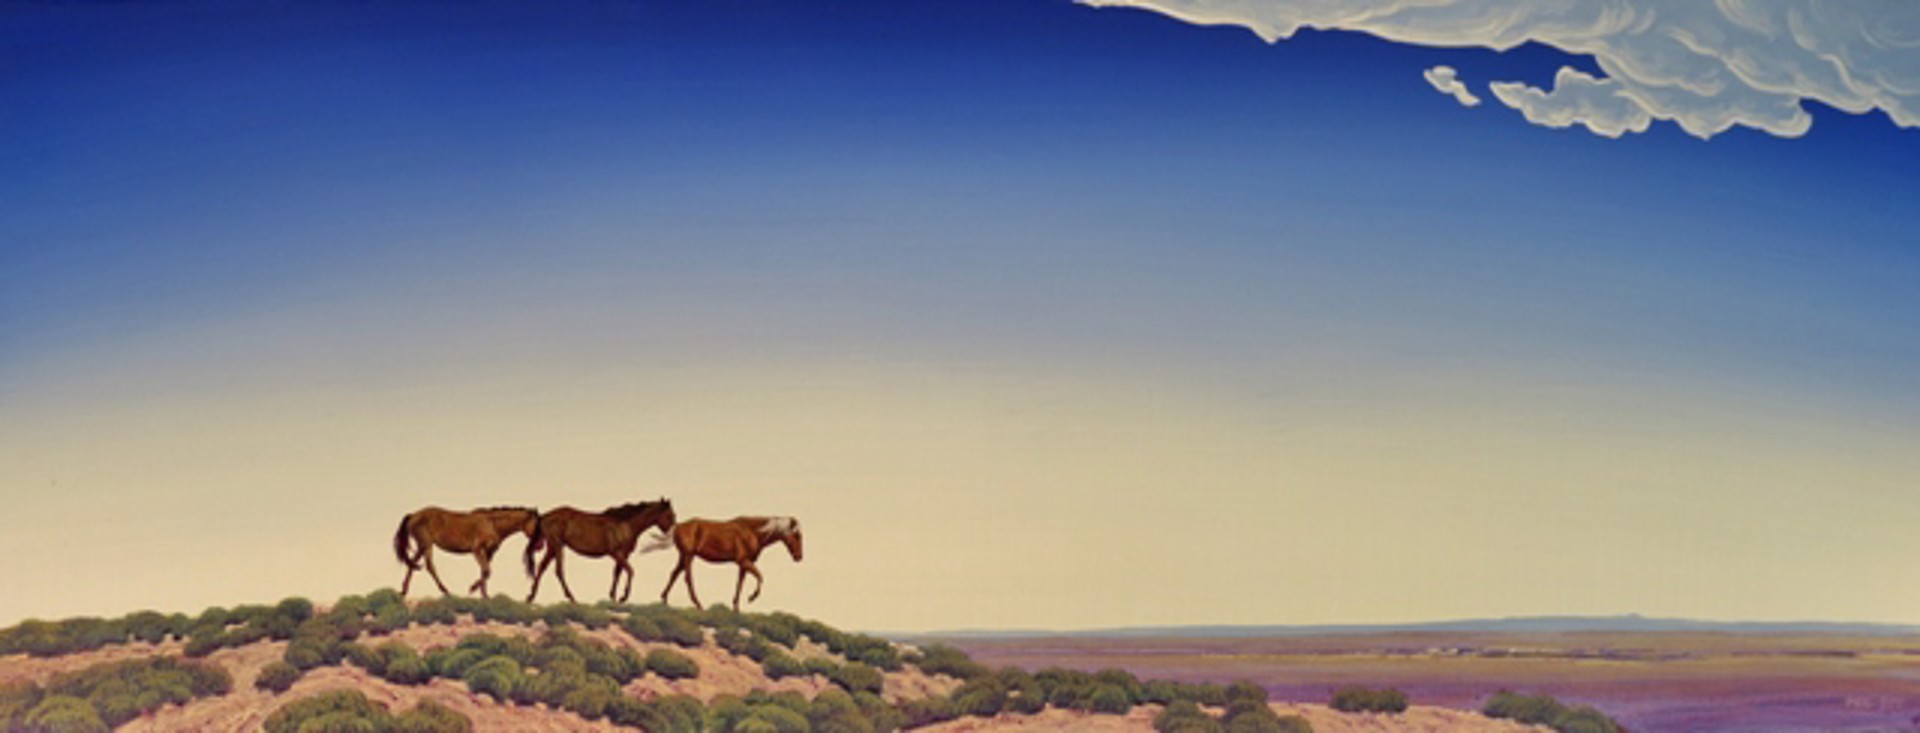 Horses On the Hill by Phil Epp